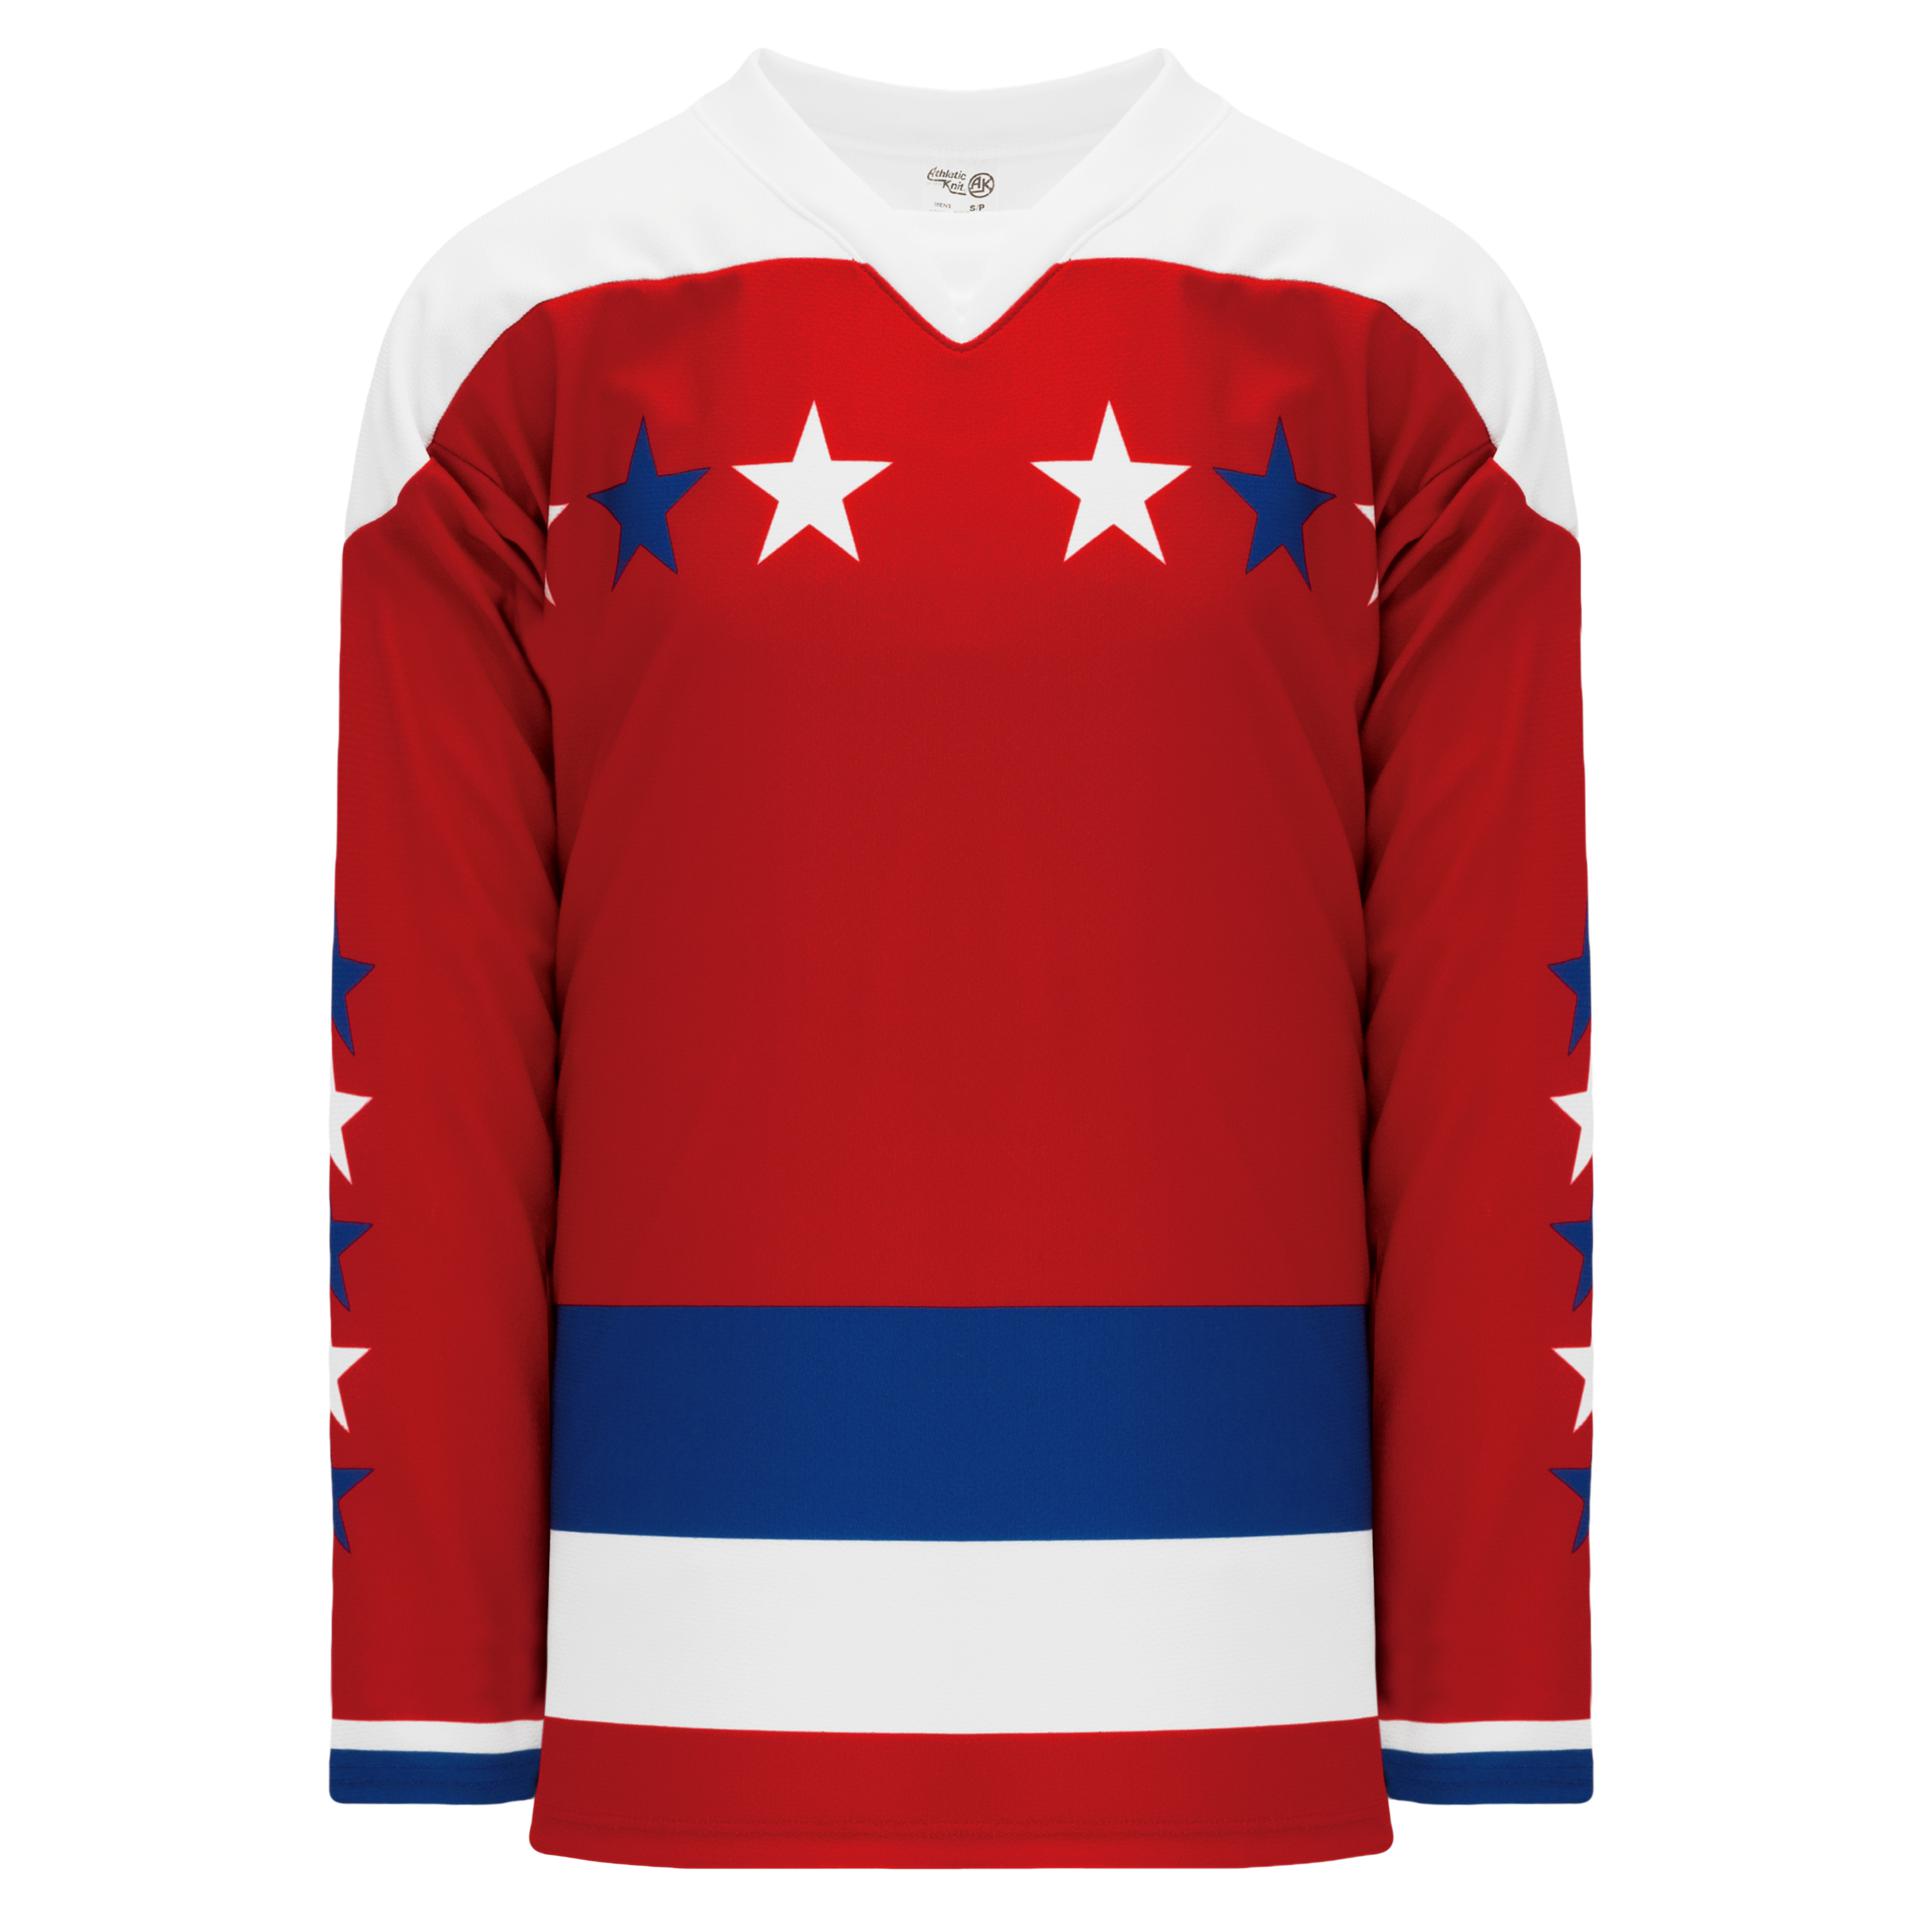 Washington Capitals have the best jerseys in the NHL